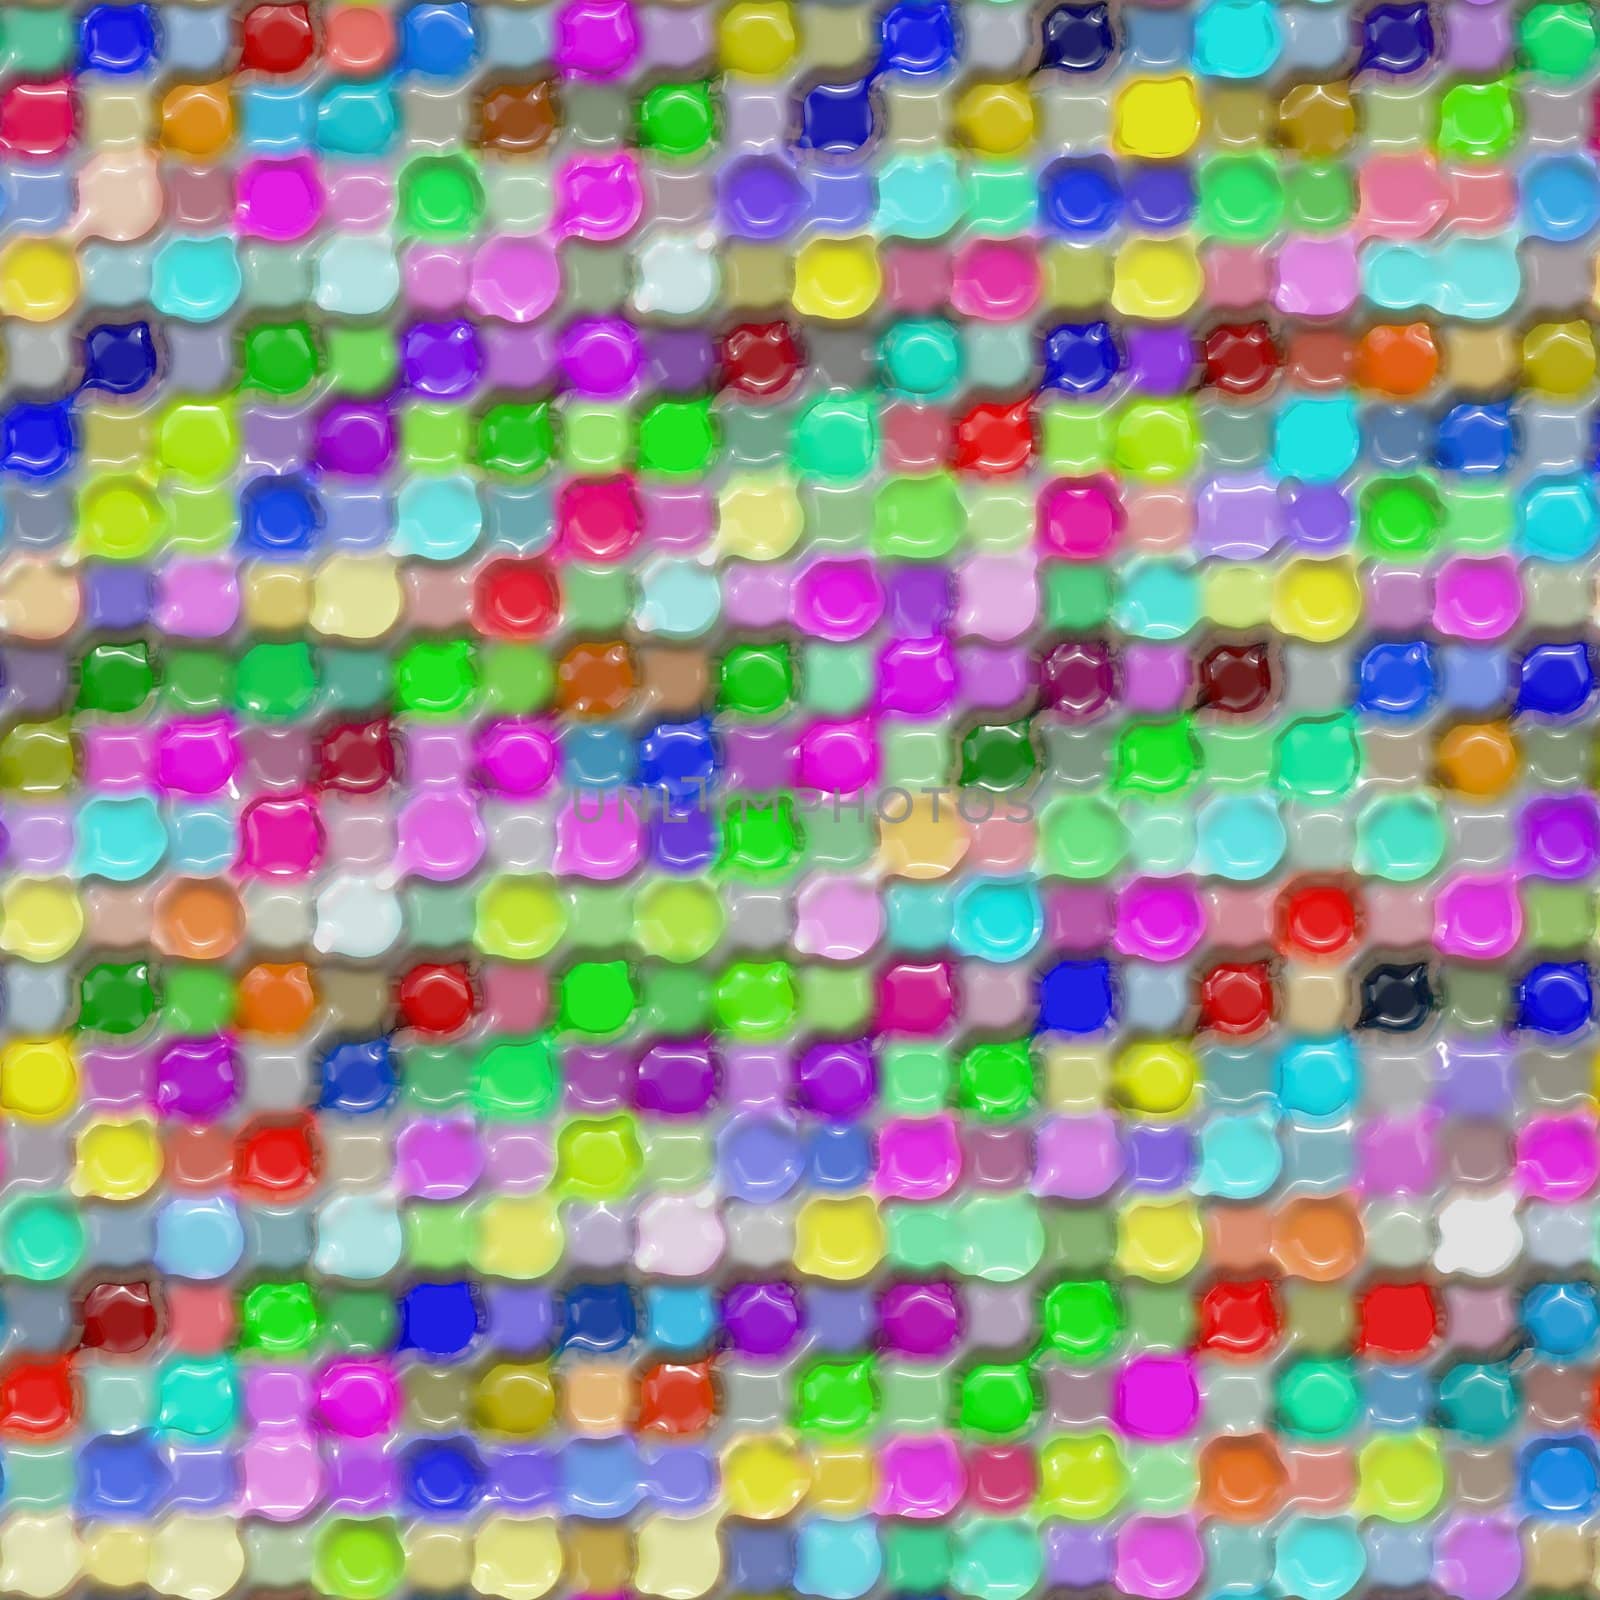 seamless texture of many bright color sd drops